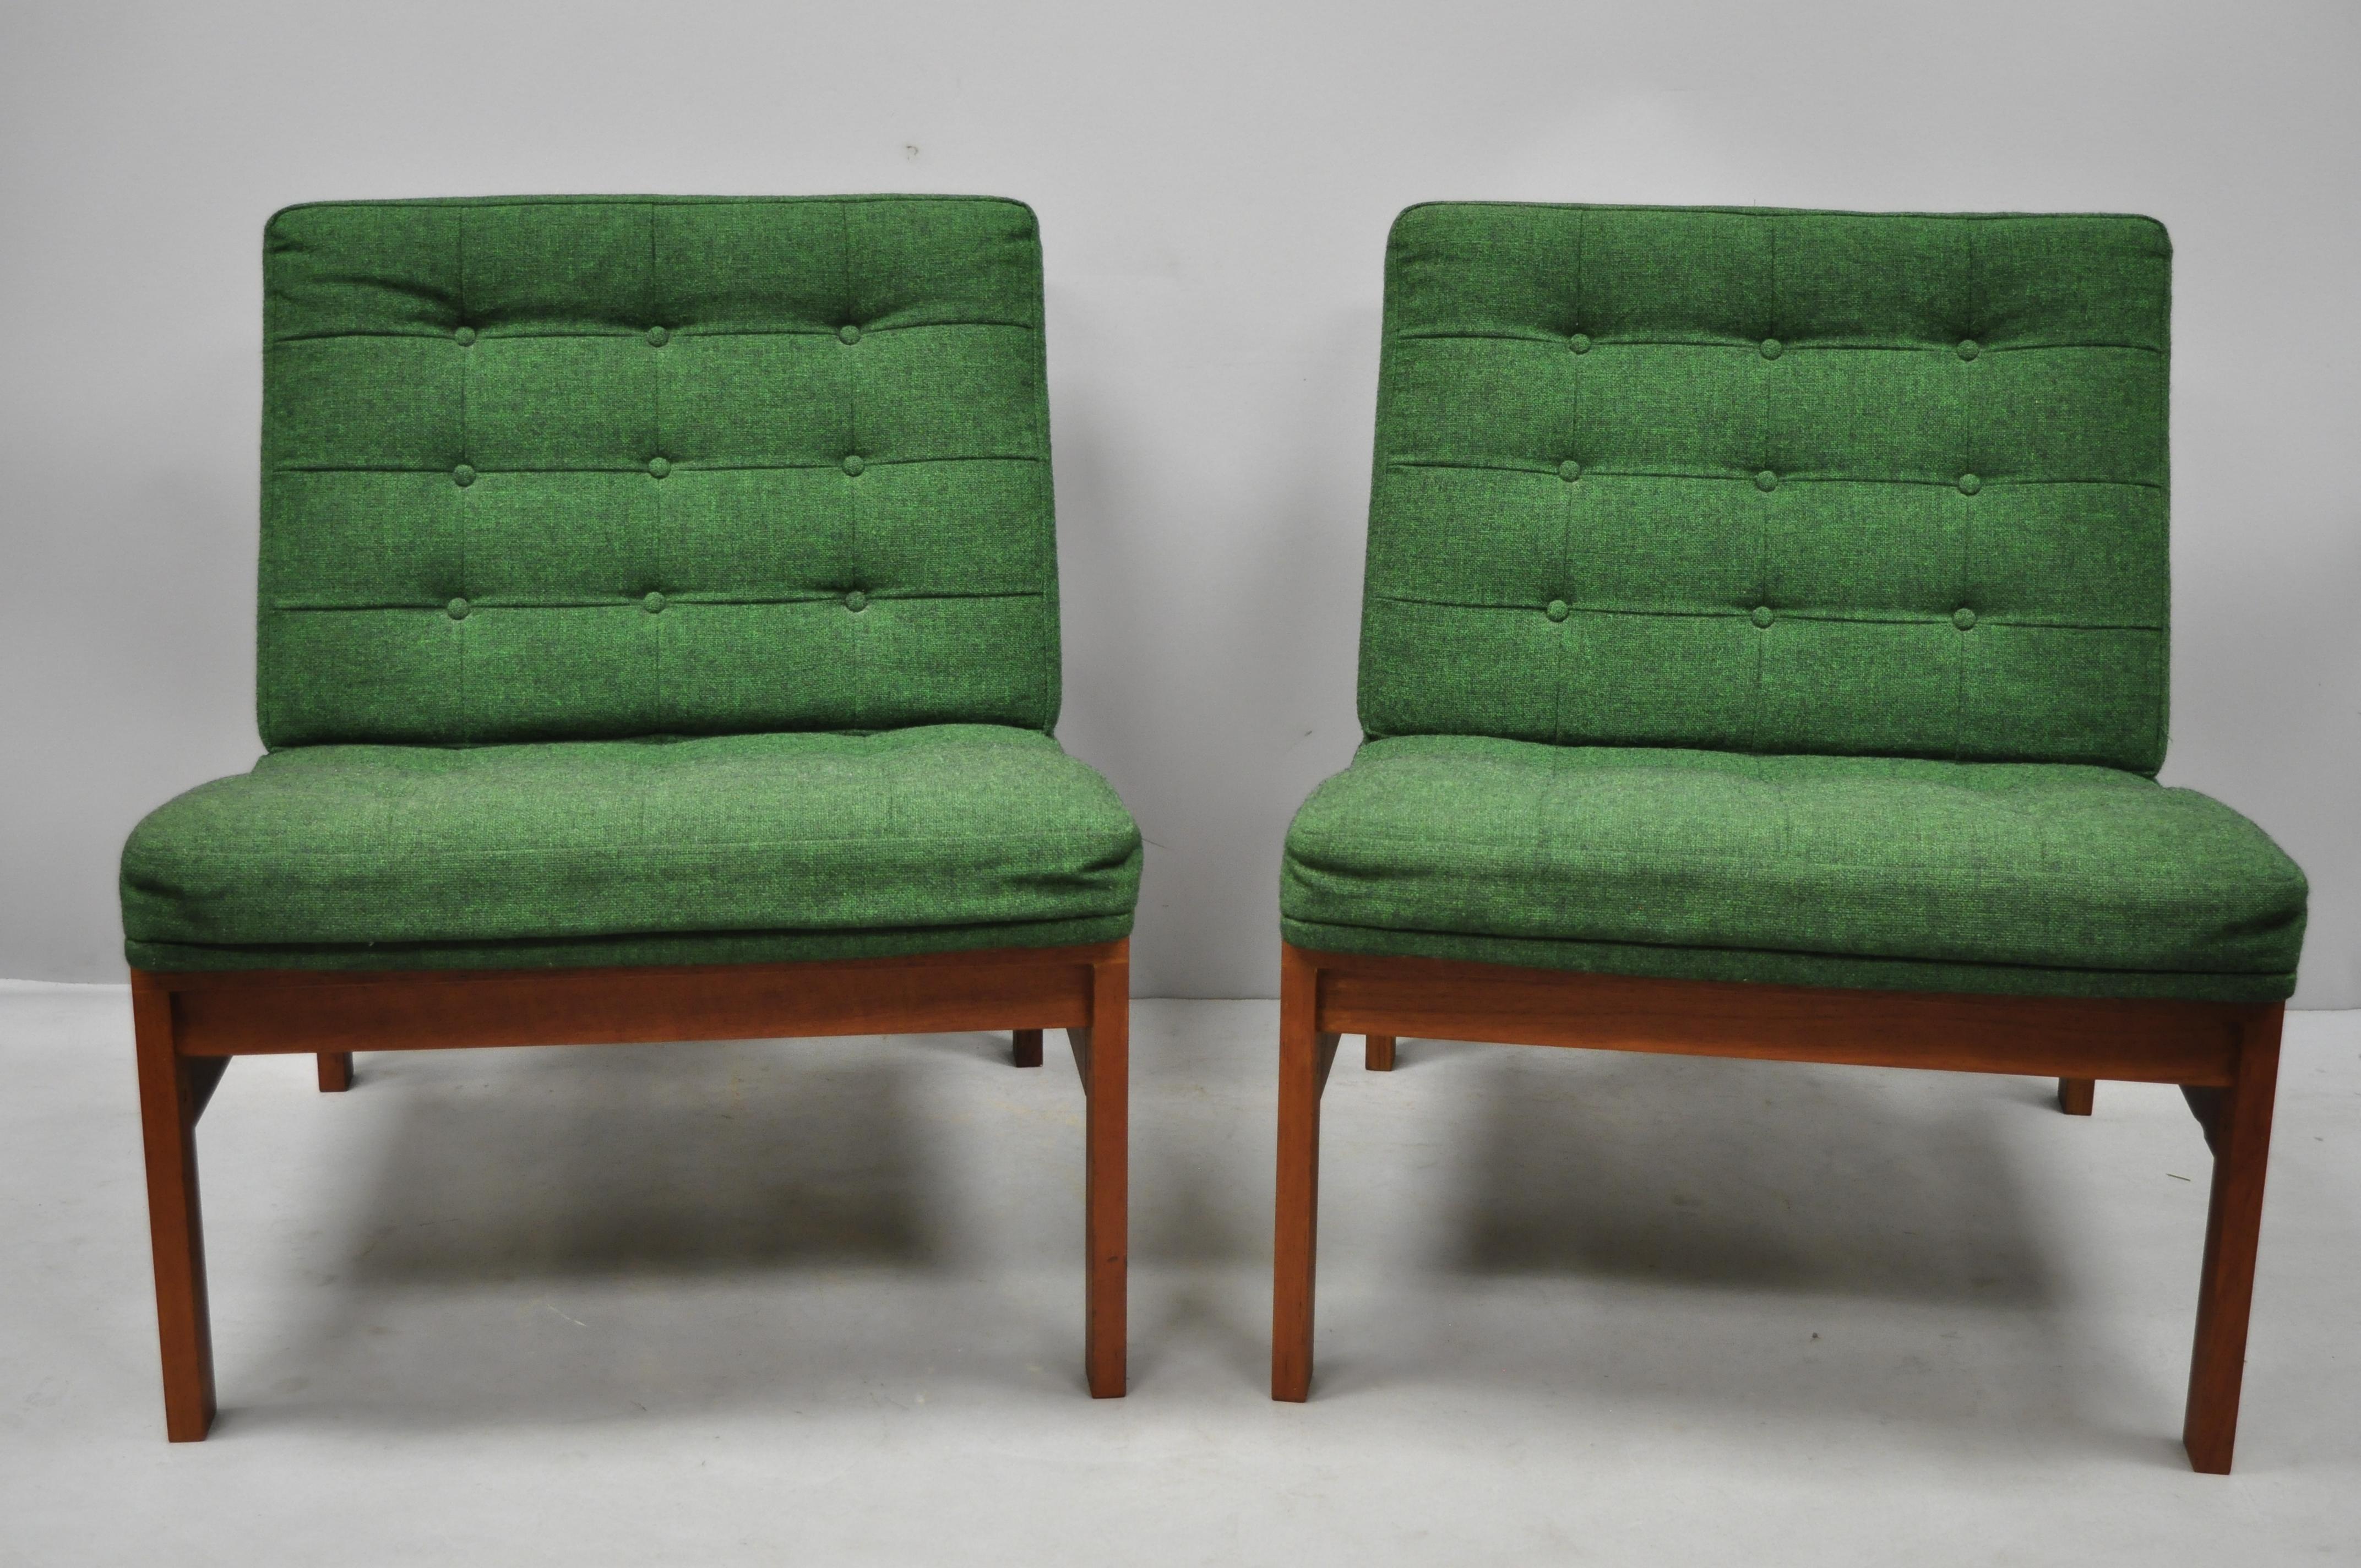 Pair of Gjerlov Knudsen & Torben Lind for France & Son green teak moduline slipper chairs. Items feature original green button tufted upholstery, exposed joinery, solid wood construction, beautiful wood grain, original label, clean modernist lines,